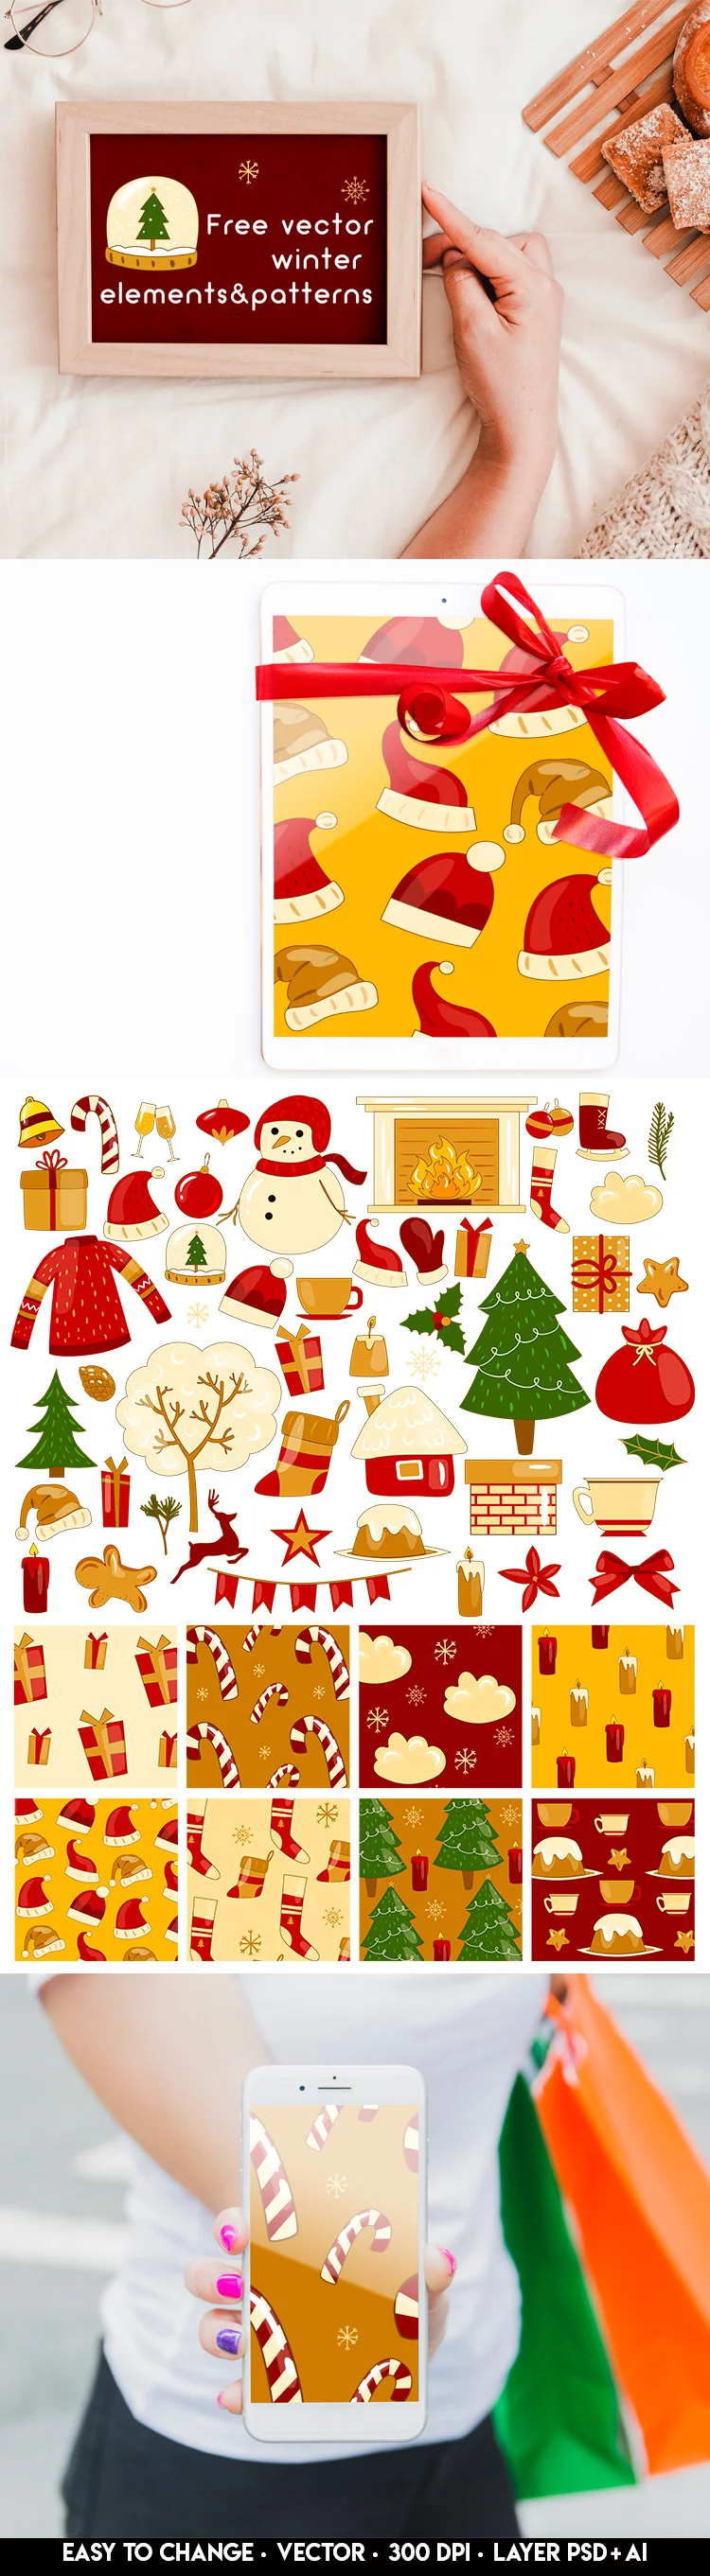 Free Vector Winter Elements And Patterns